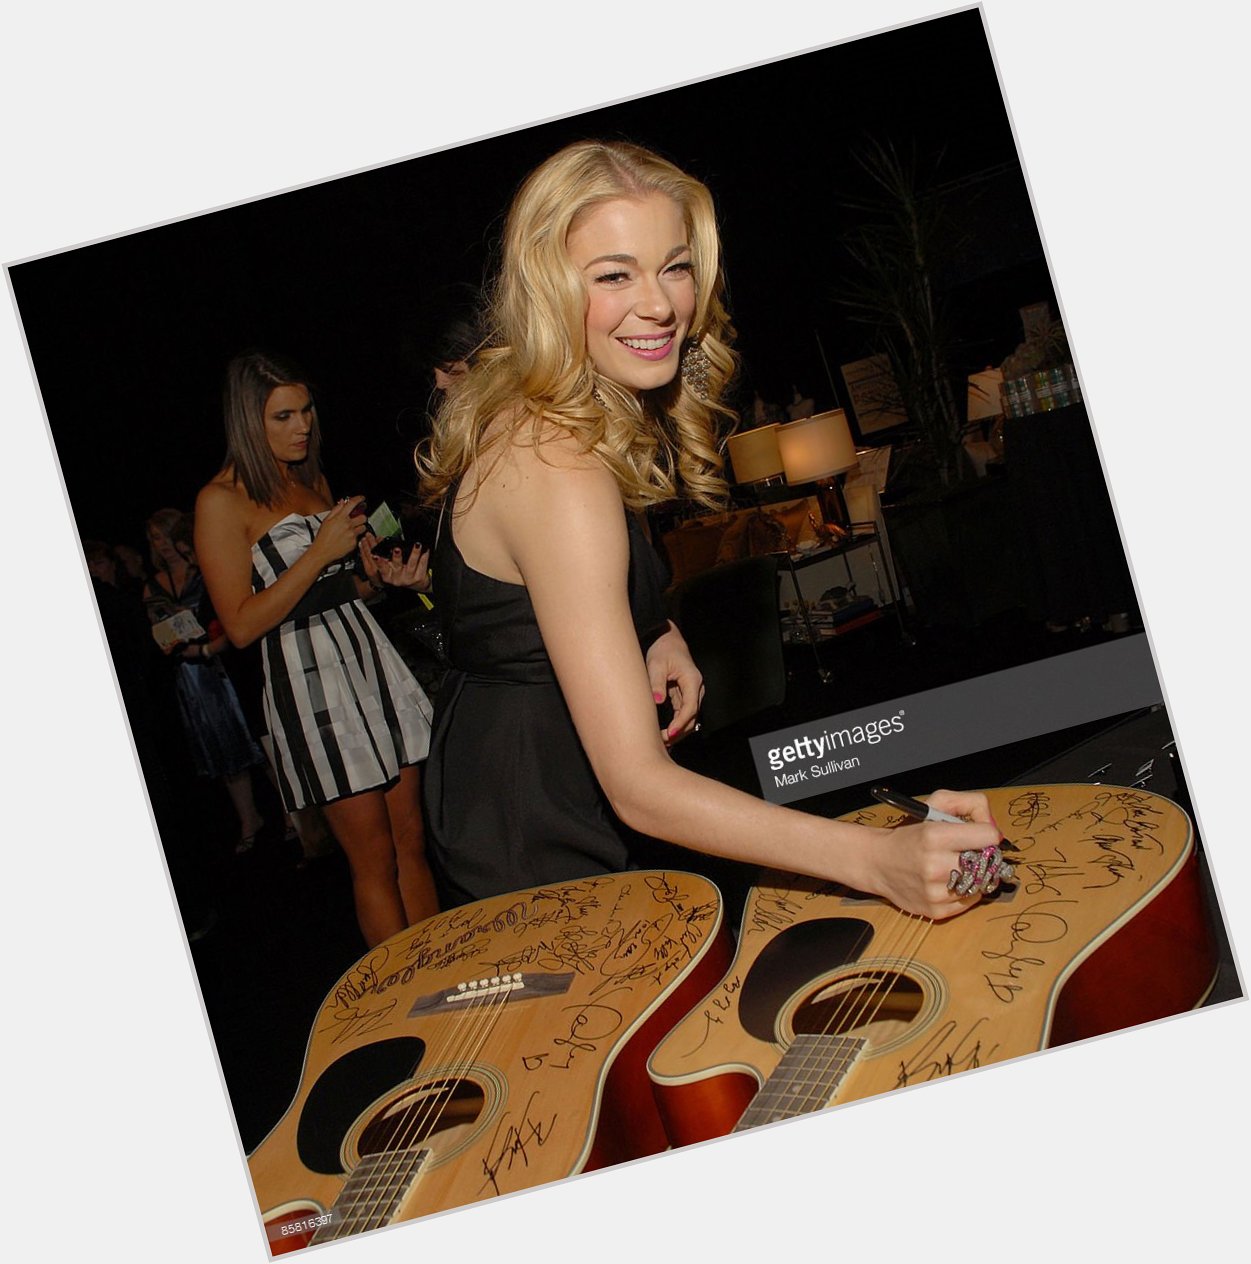 Happy Birthday to LeAnn Rimes, who turns 35 today! 